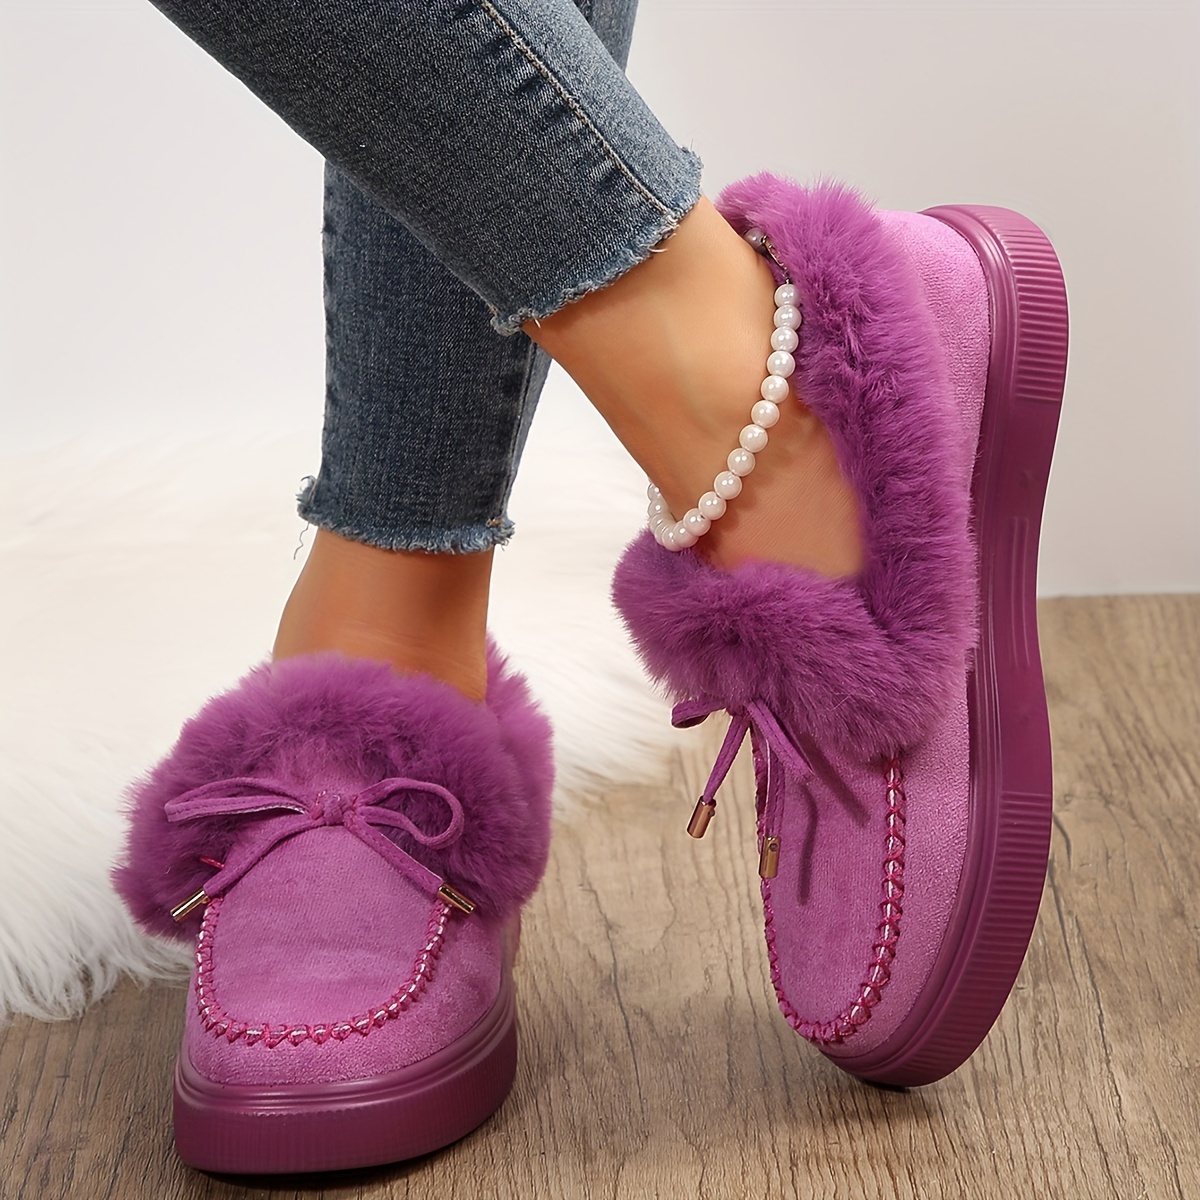 Women s Fluffy Fleece Lining Snow Boots Solid Color Bowknot Slip On Ankle Boots Cozy Winter Warm Flat Boots details 2